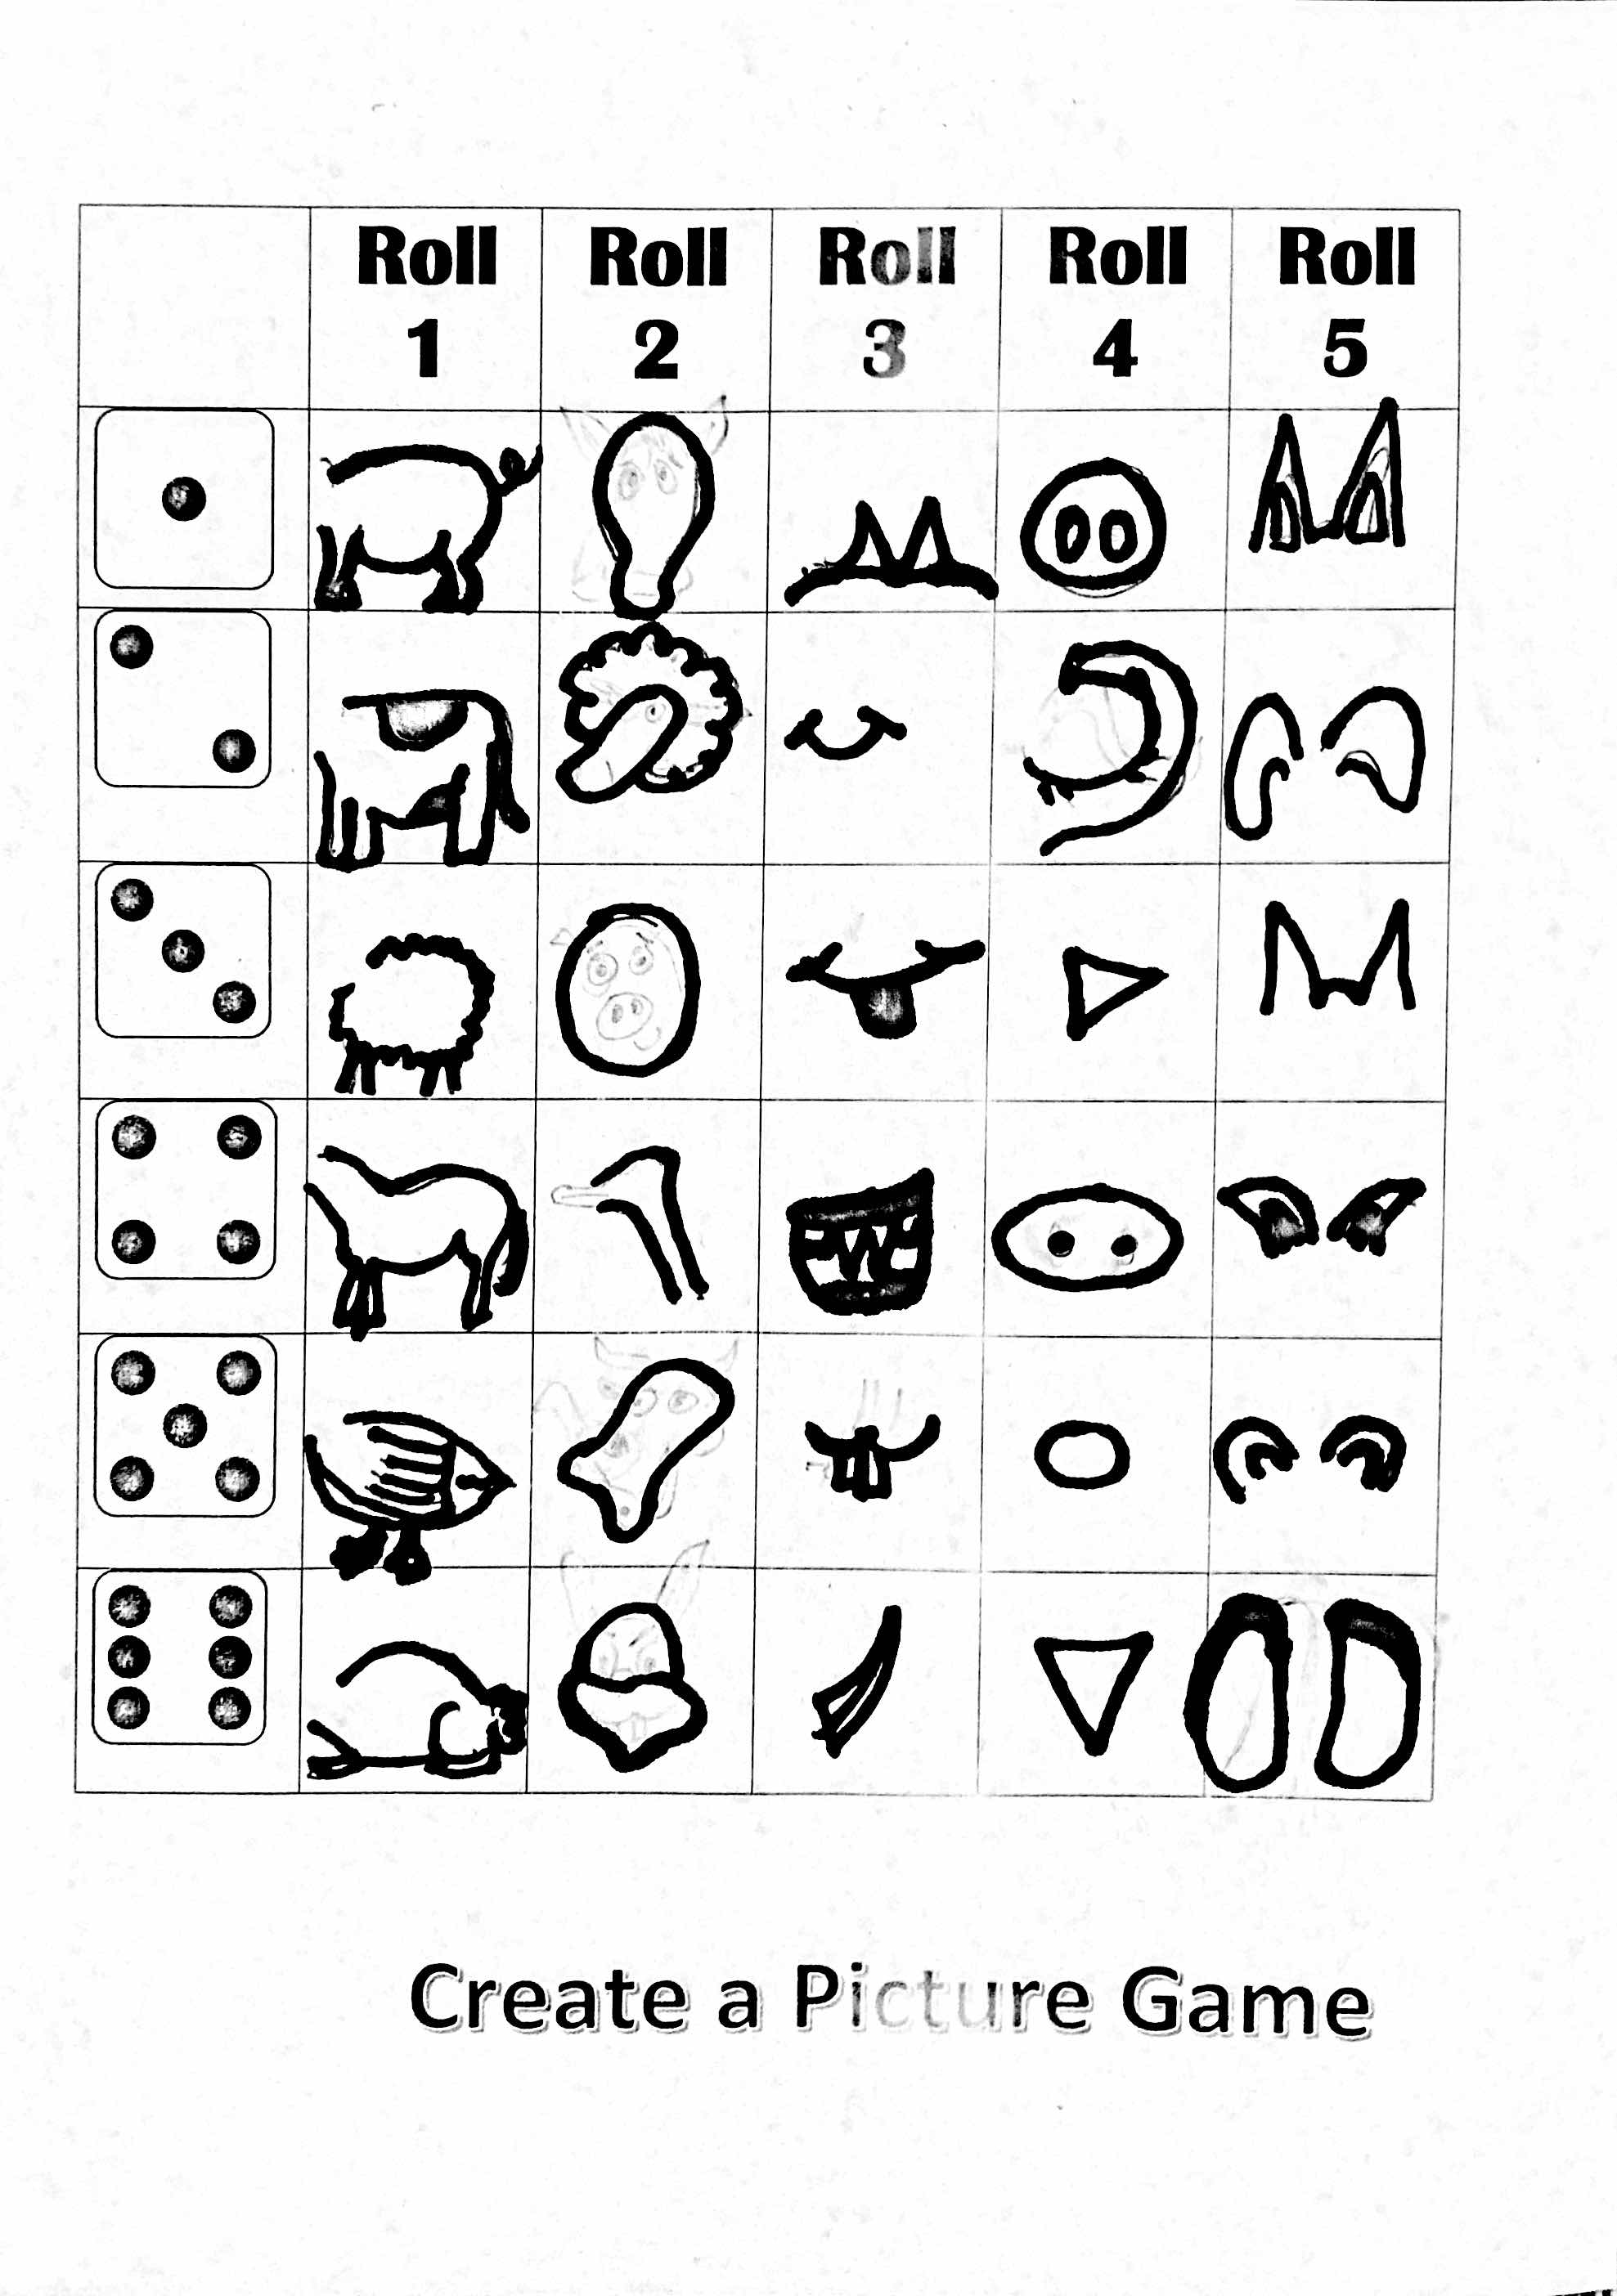 Roll a Dice Game-Draw An Animal image